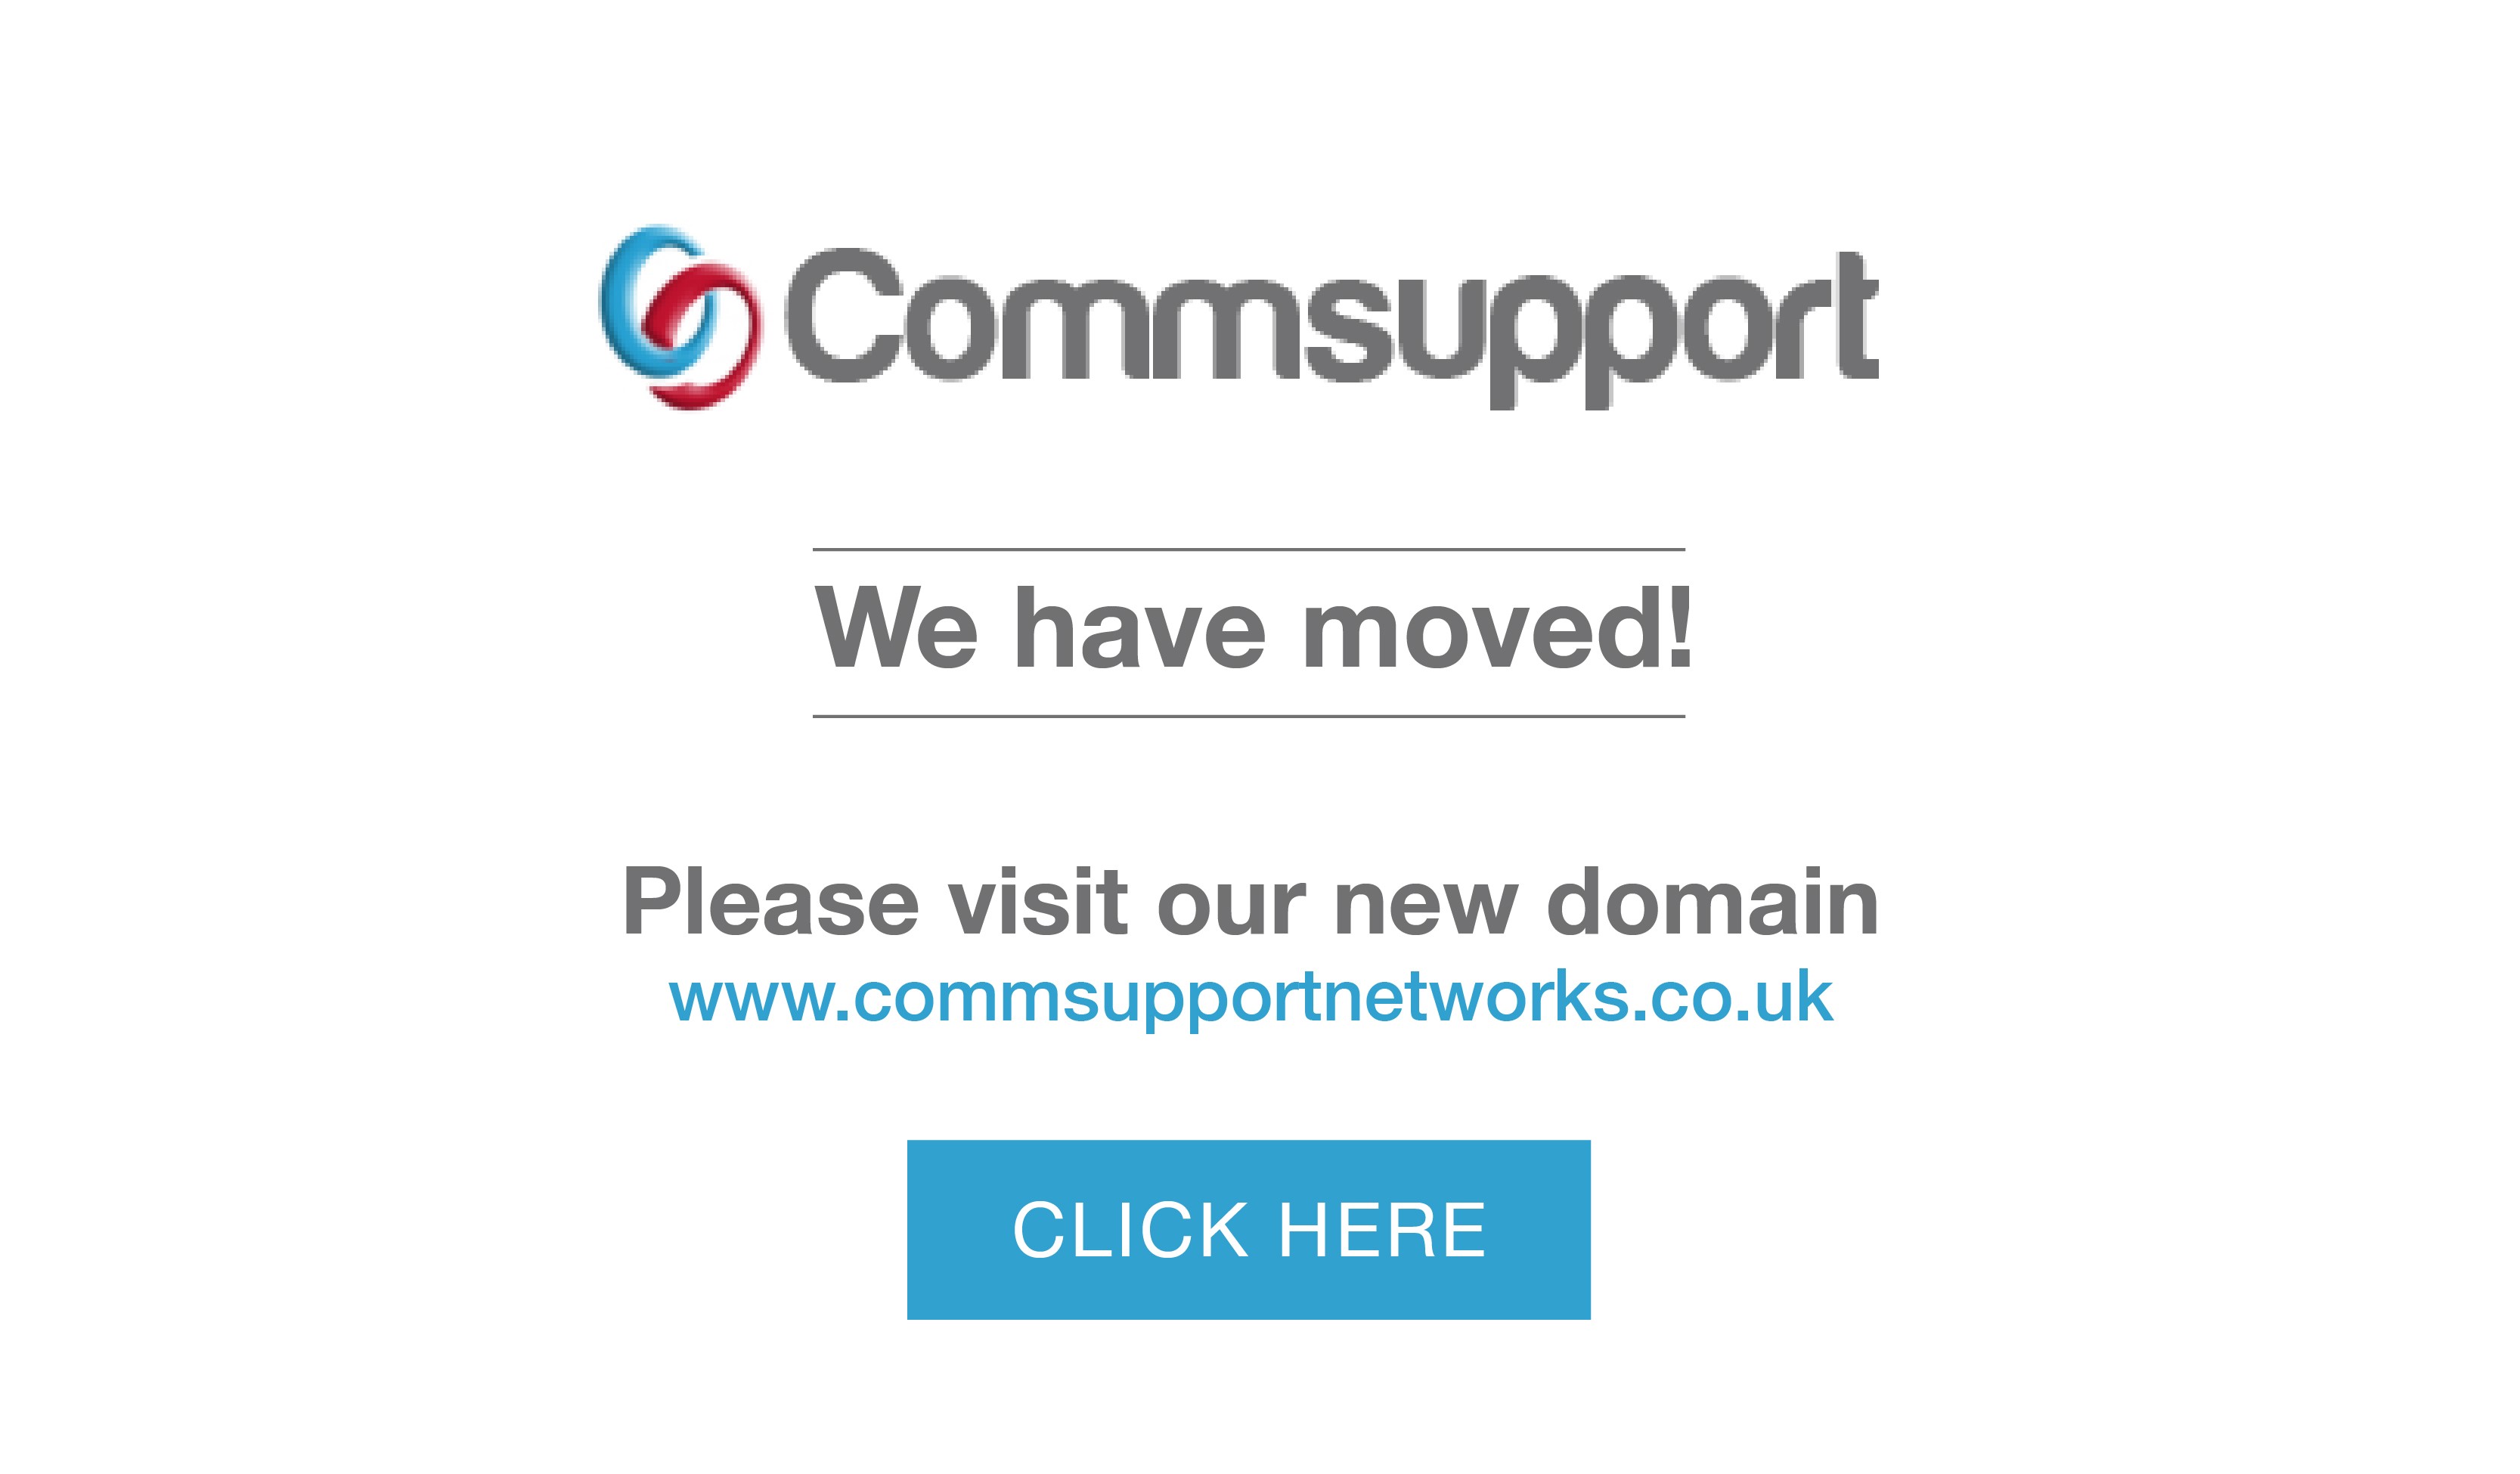 Commsupport.co.uk